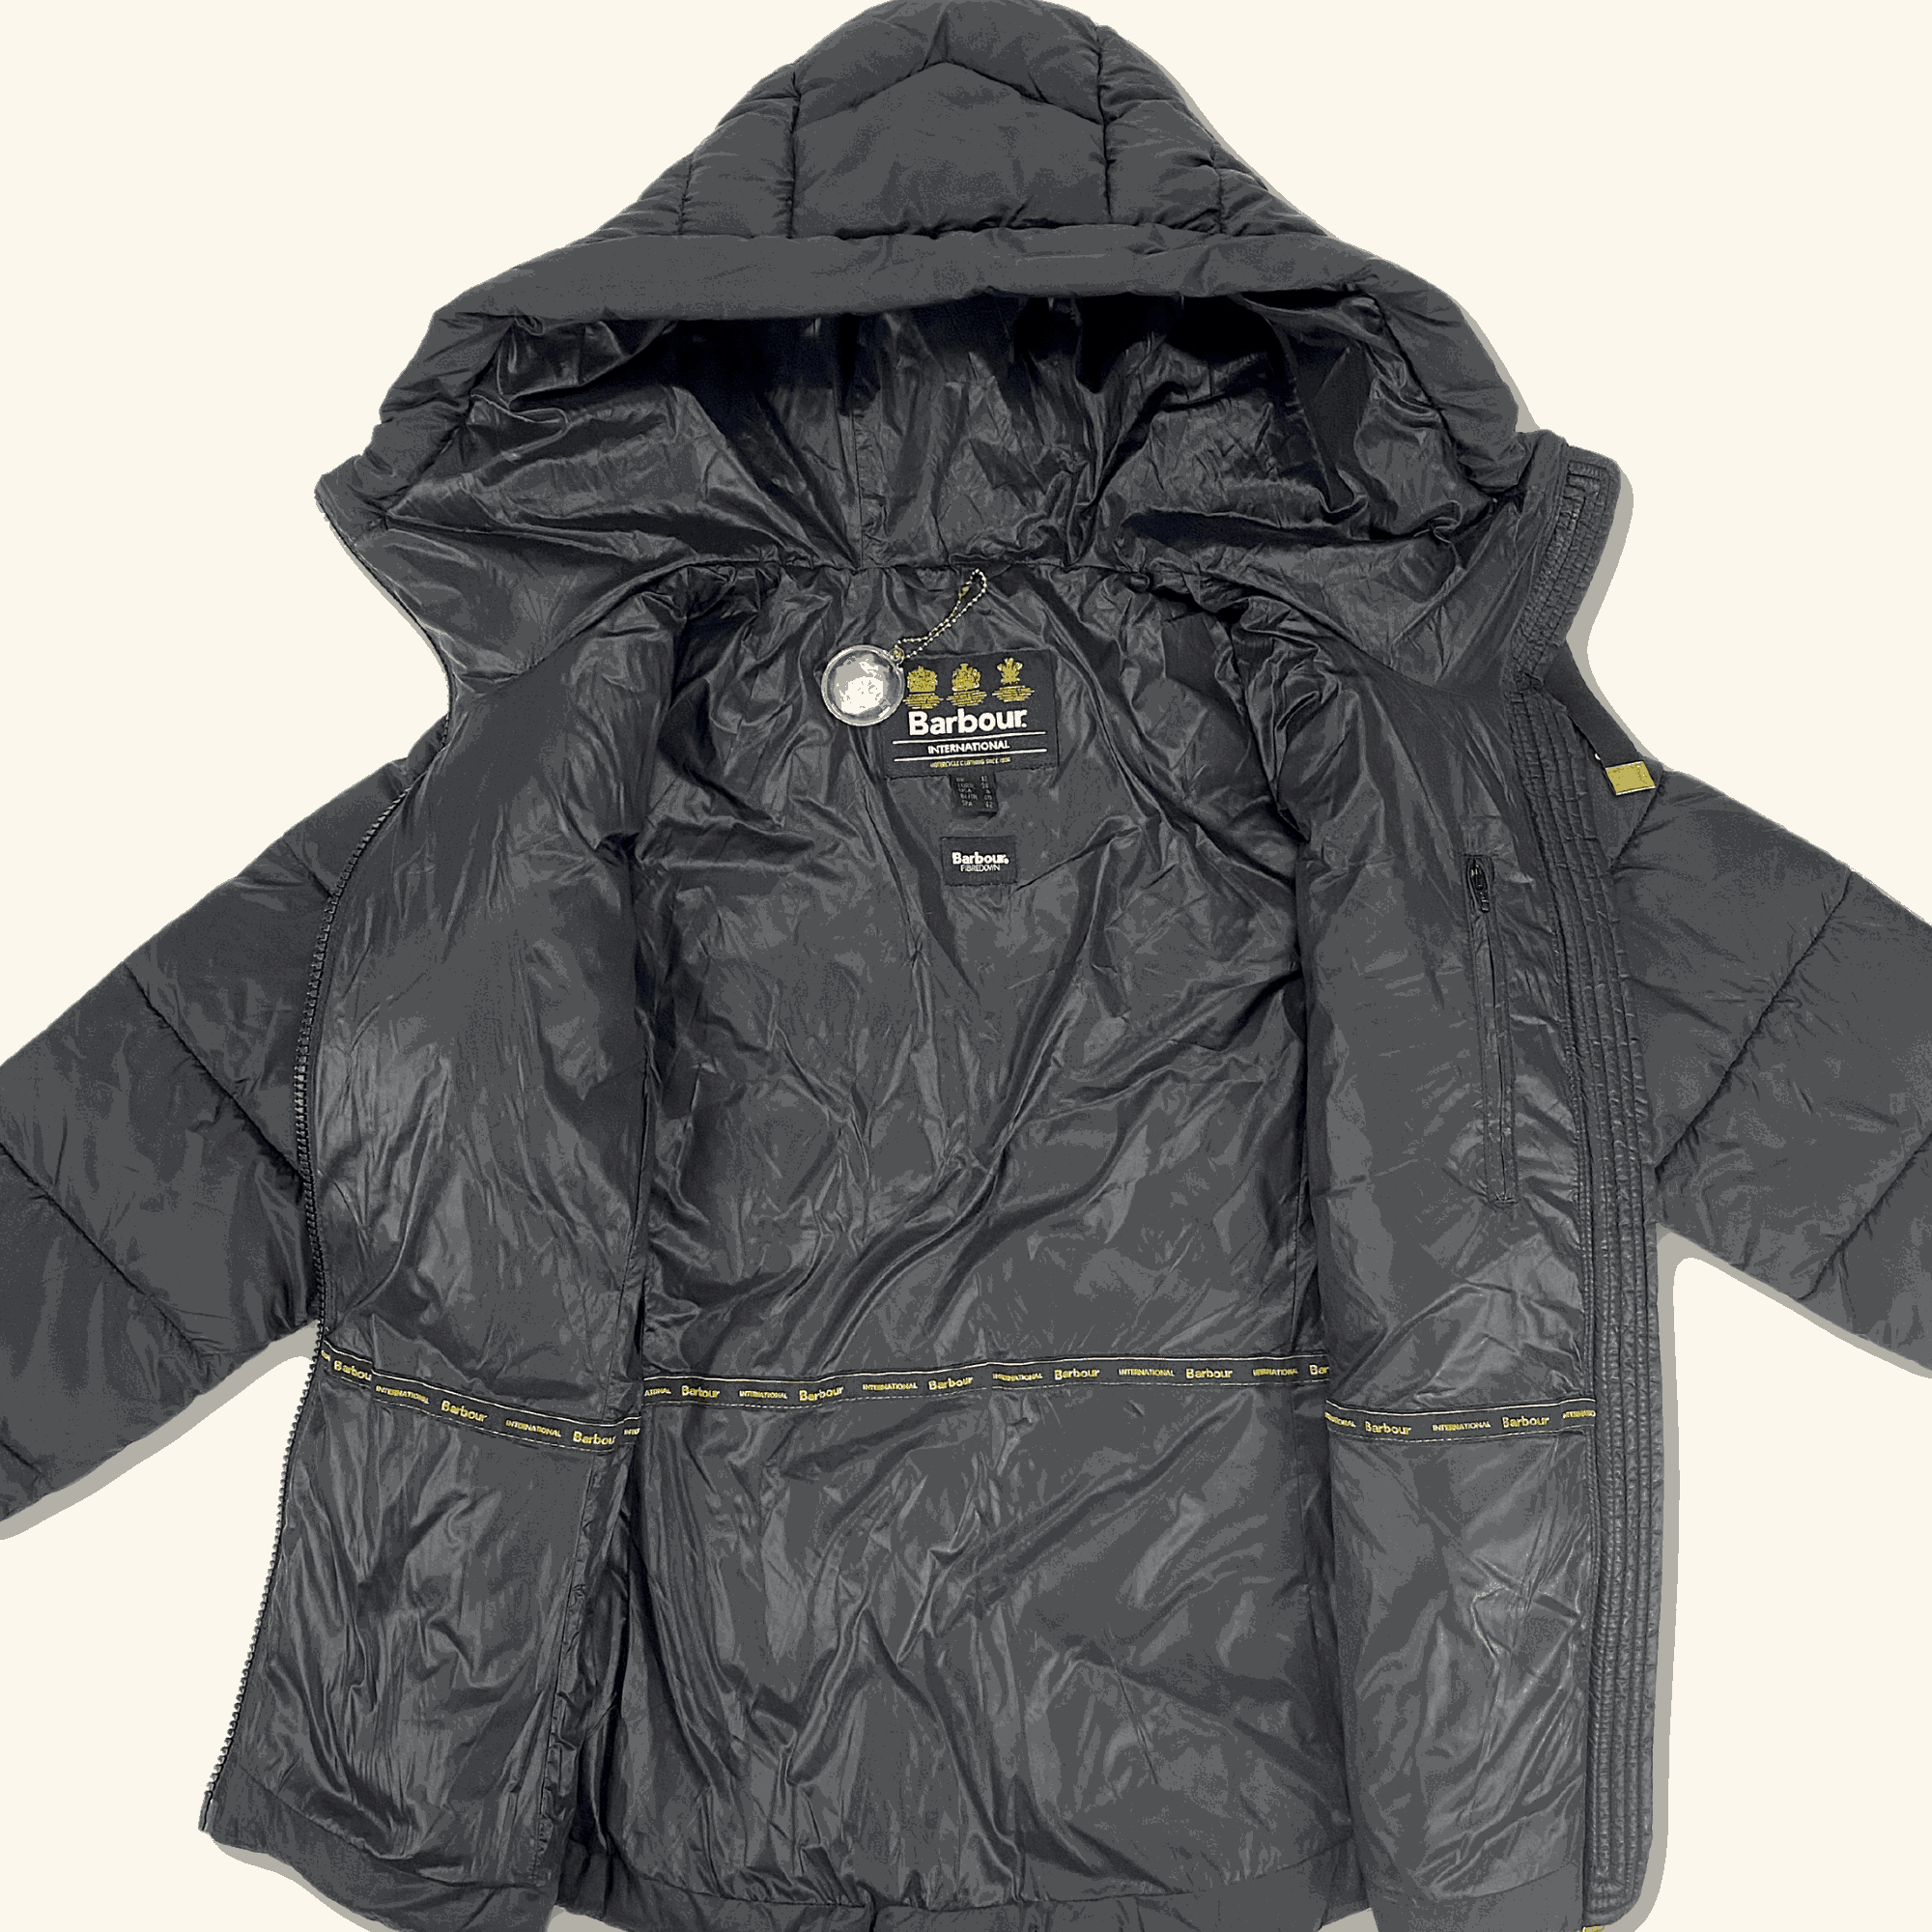 Barbour Brace Chevron Quilted Jacket with Hood Black - Size 12 - Barbour - Coats &amp; jackets